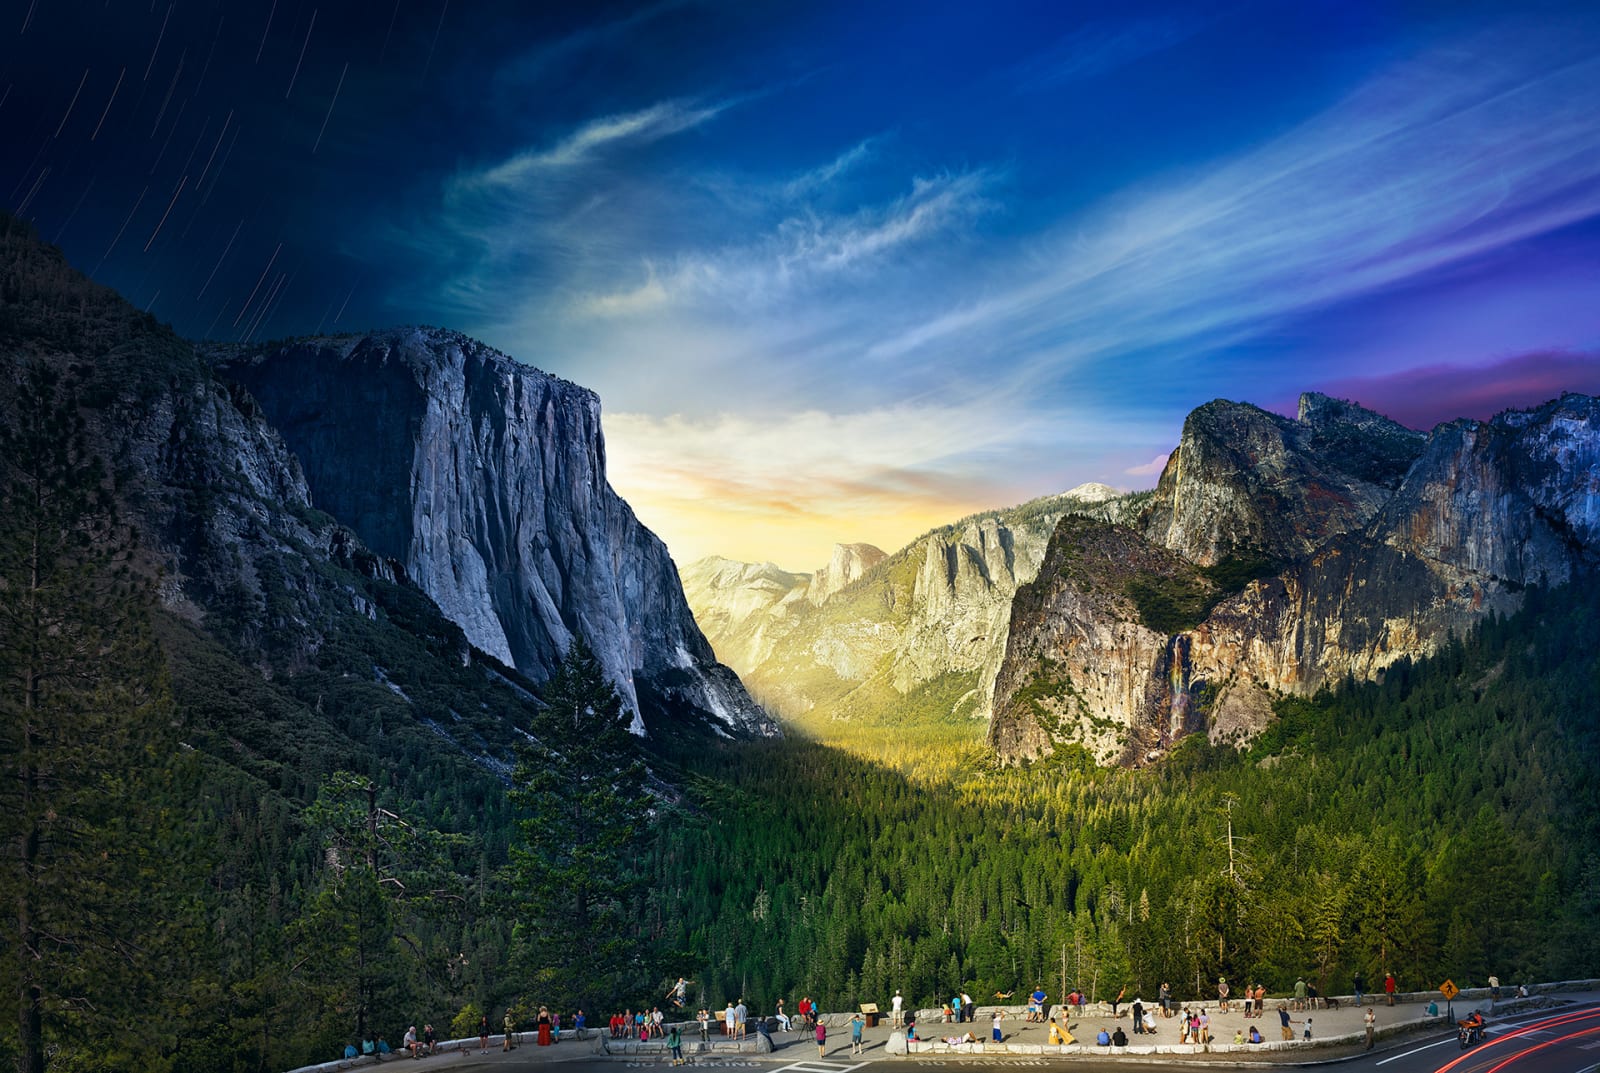 Stephen Wilkes, Tunnel View, Yosemite National Park, Day to Night™, 2014